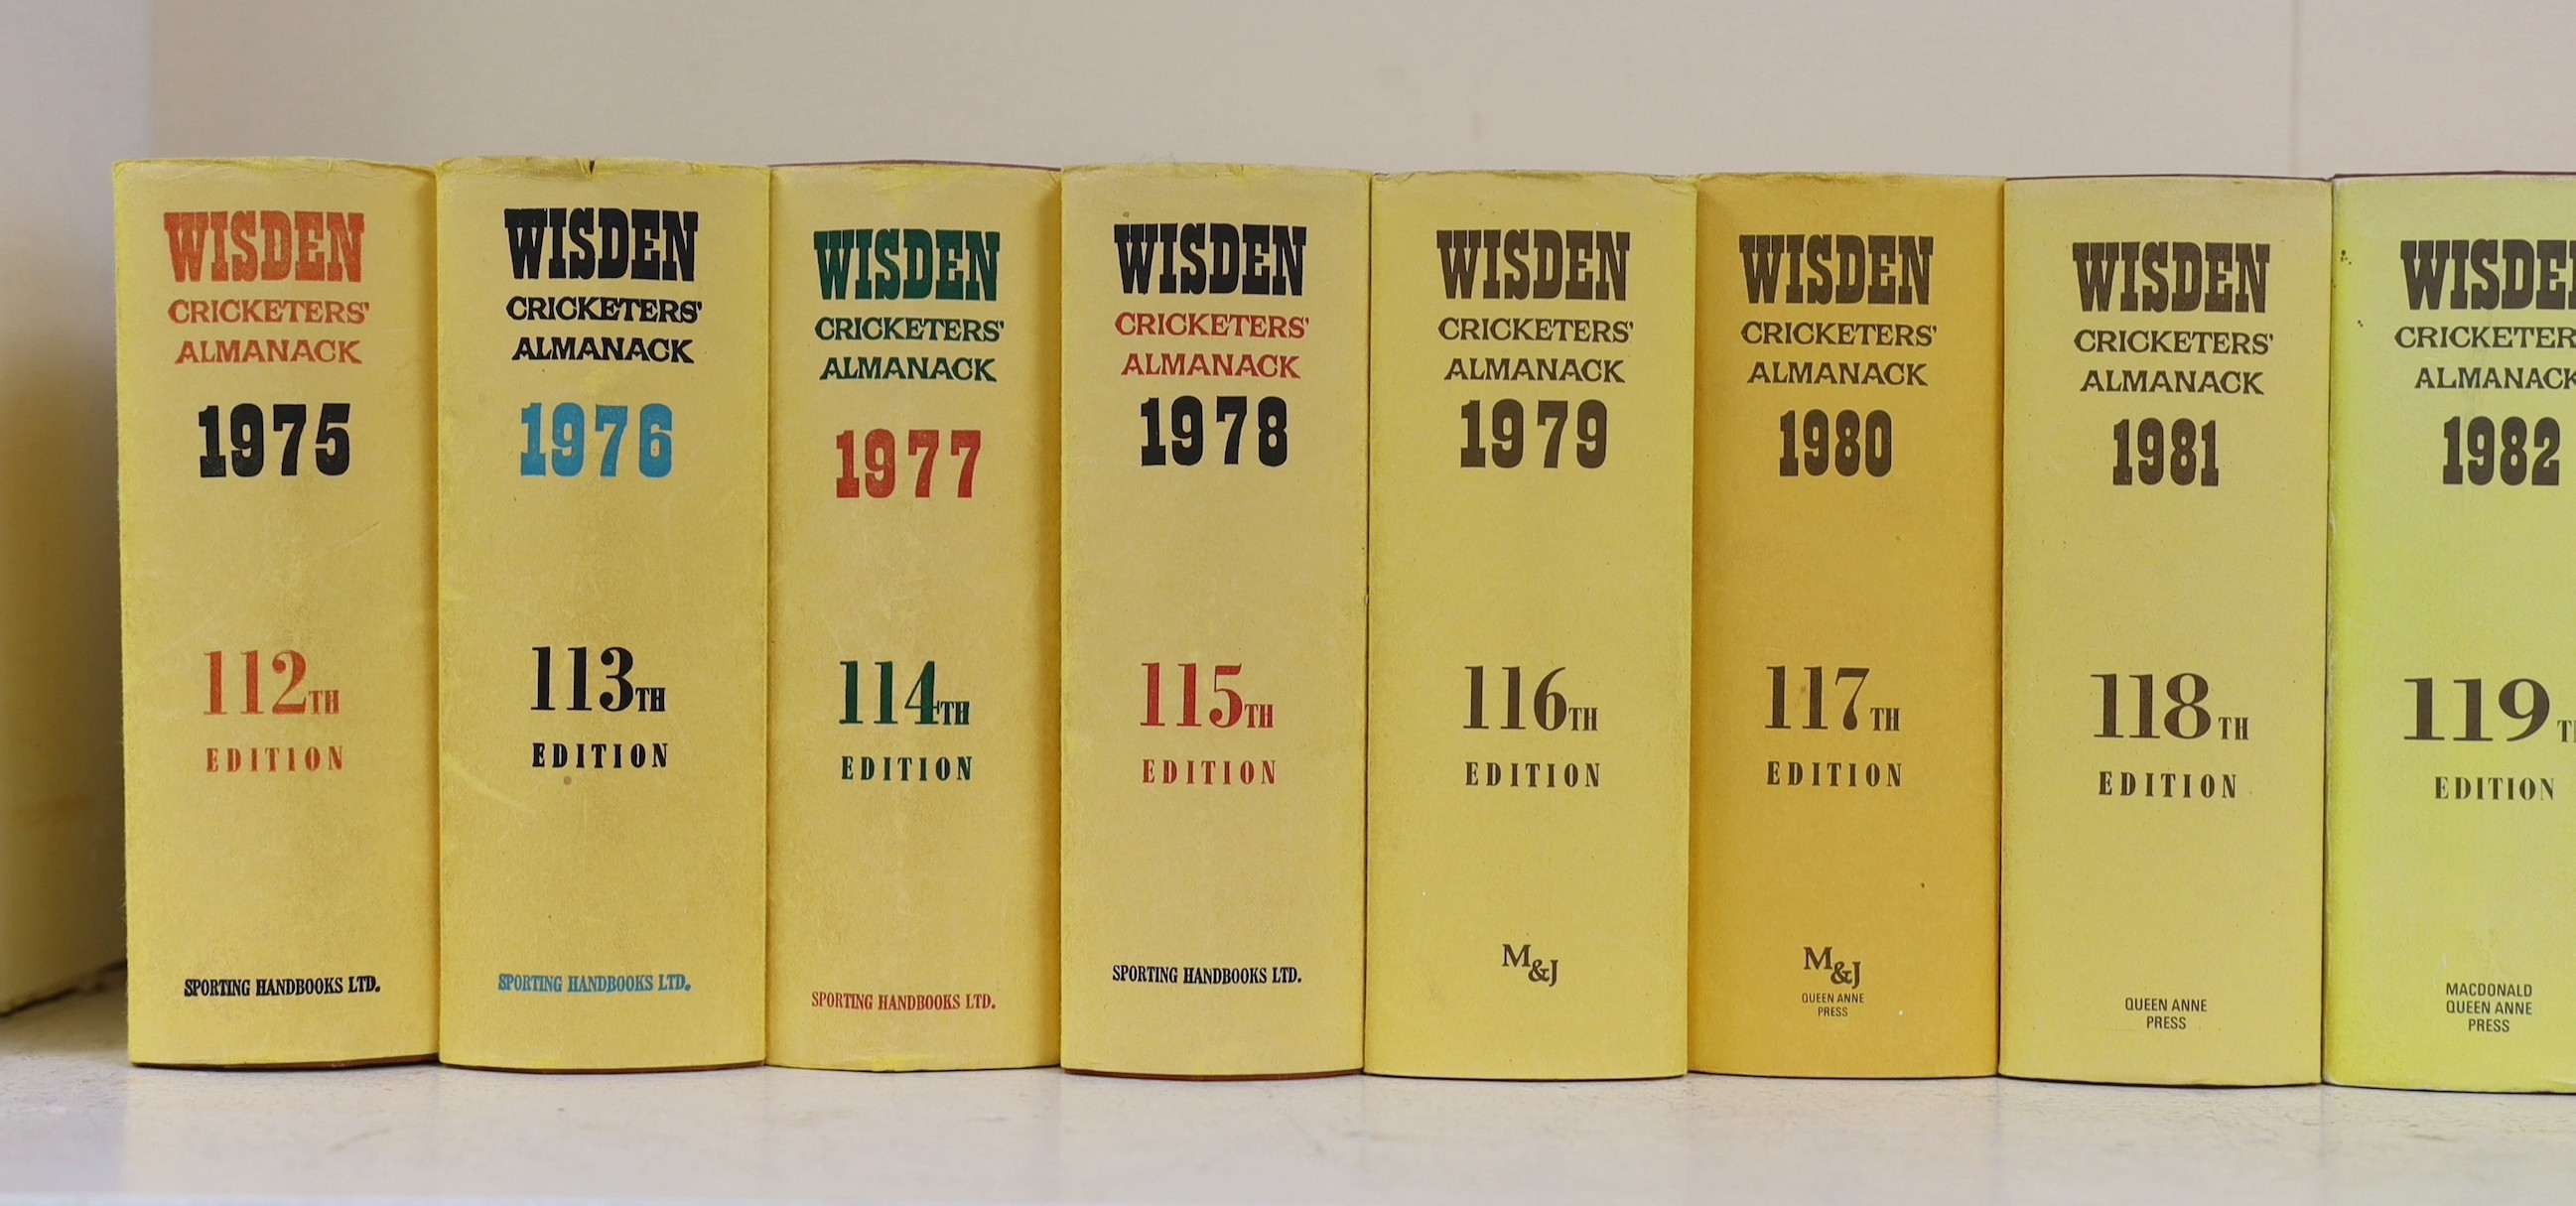 Wisden, John - Cricketers Almanack for the years 1975 (112th edition) - 2018 (155th edition), all hardbacks, with unclipped dust jackets. Together with - An Index to Wisden Cricketers’ Almanack 1864-1984 and Wisden ‘’Wha